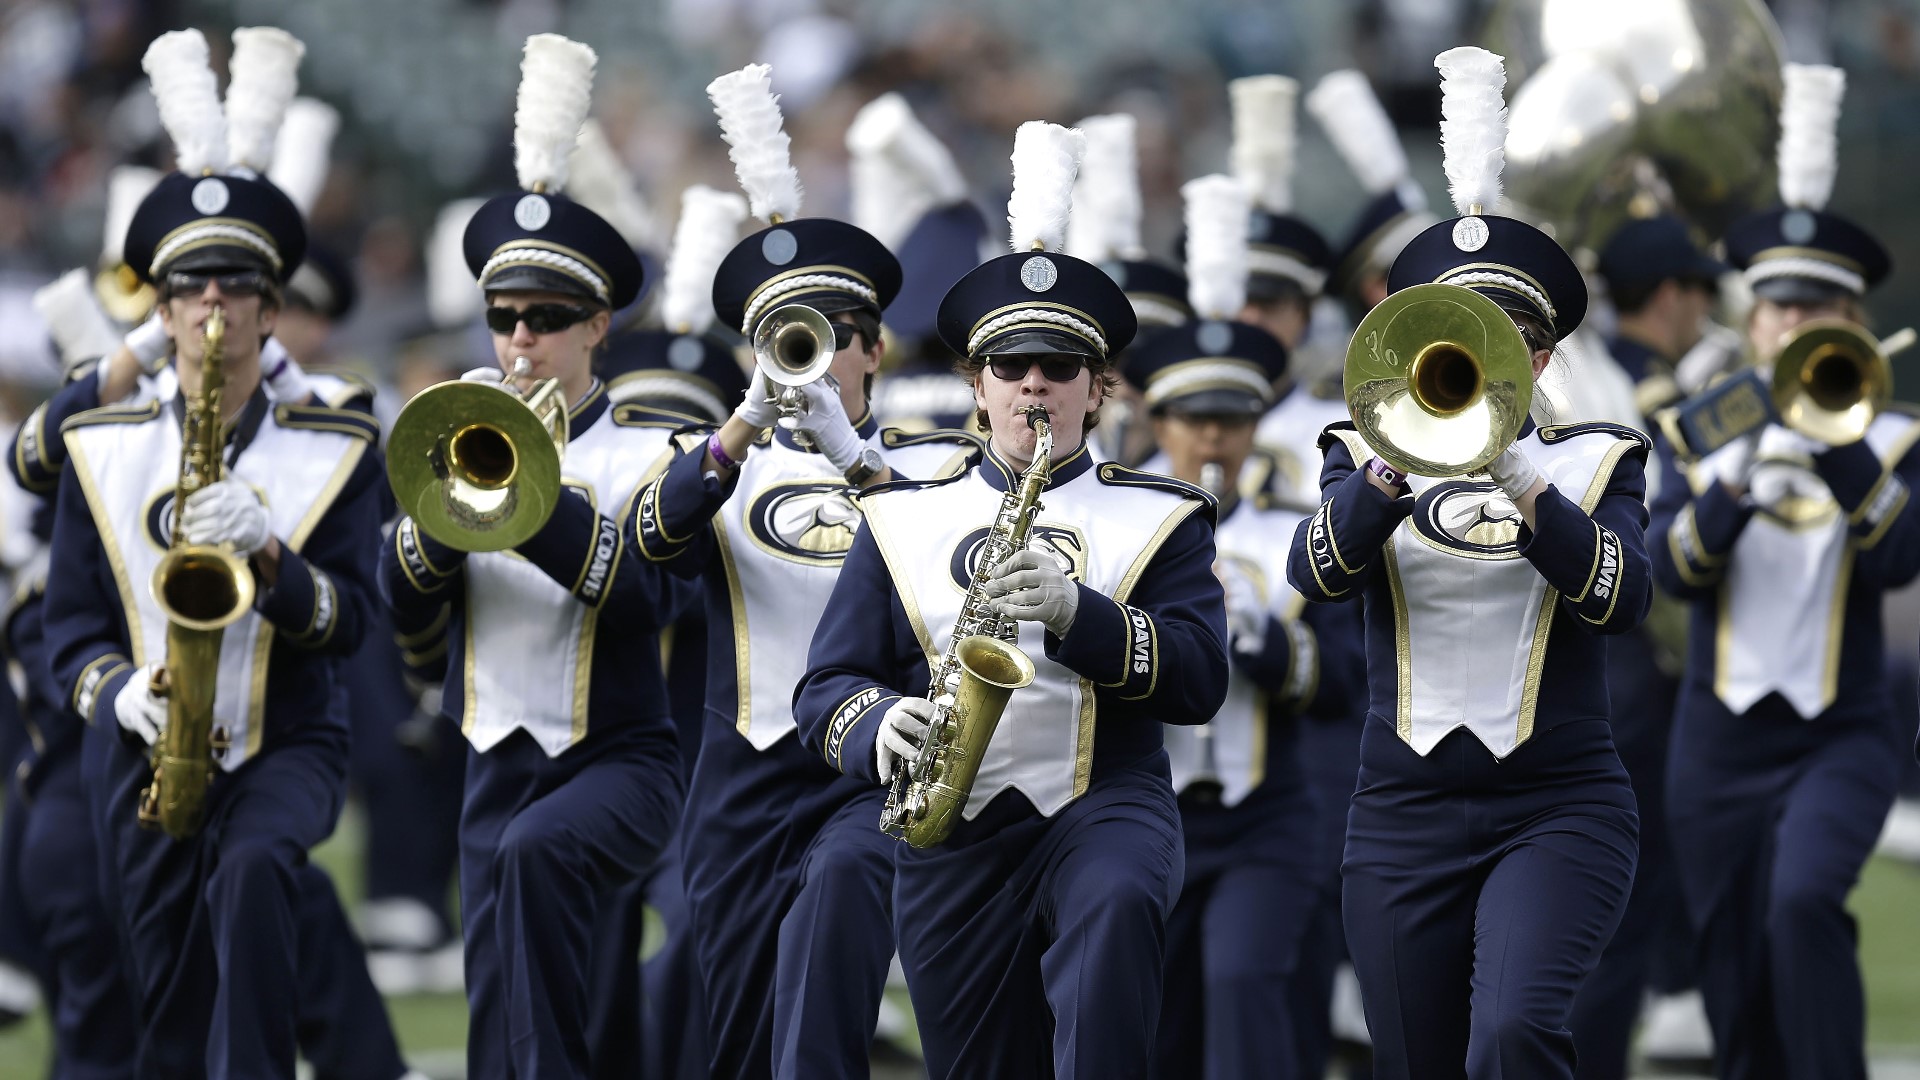 Following reports of misconduct, UC Davis Division of Student Affairs has placed the Cal Aggie Marching Band (CAMB) on interim suspension. This is the second time the organization and its affiliates have been investigated.